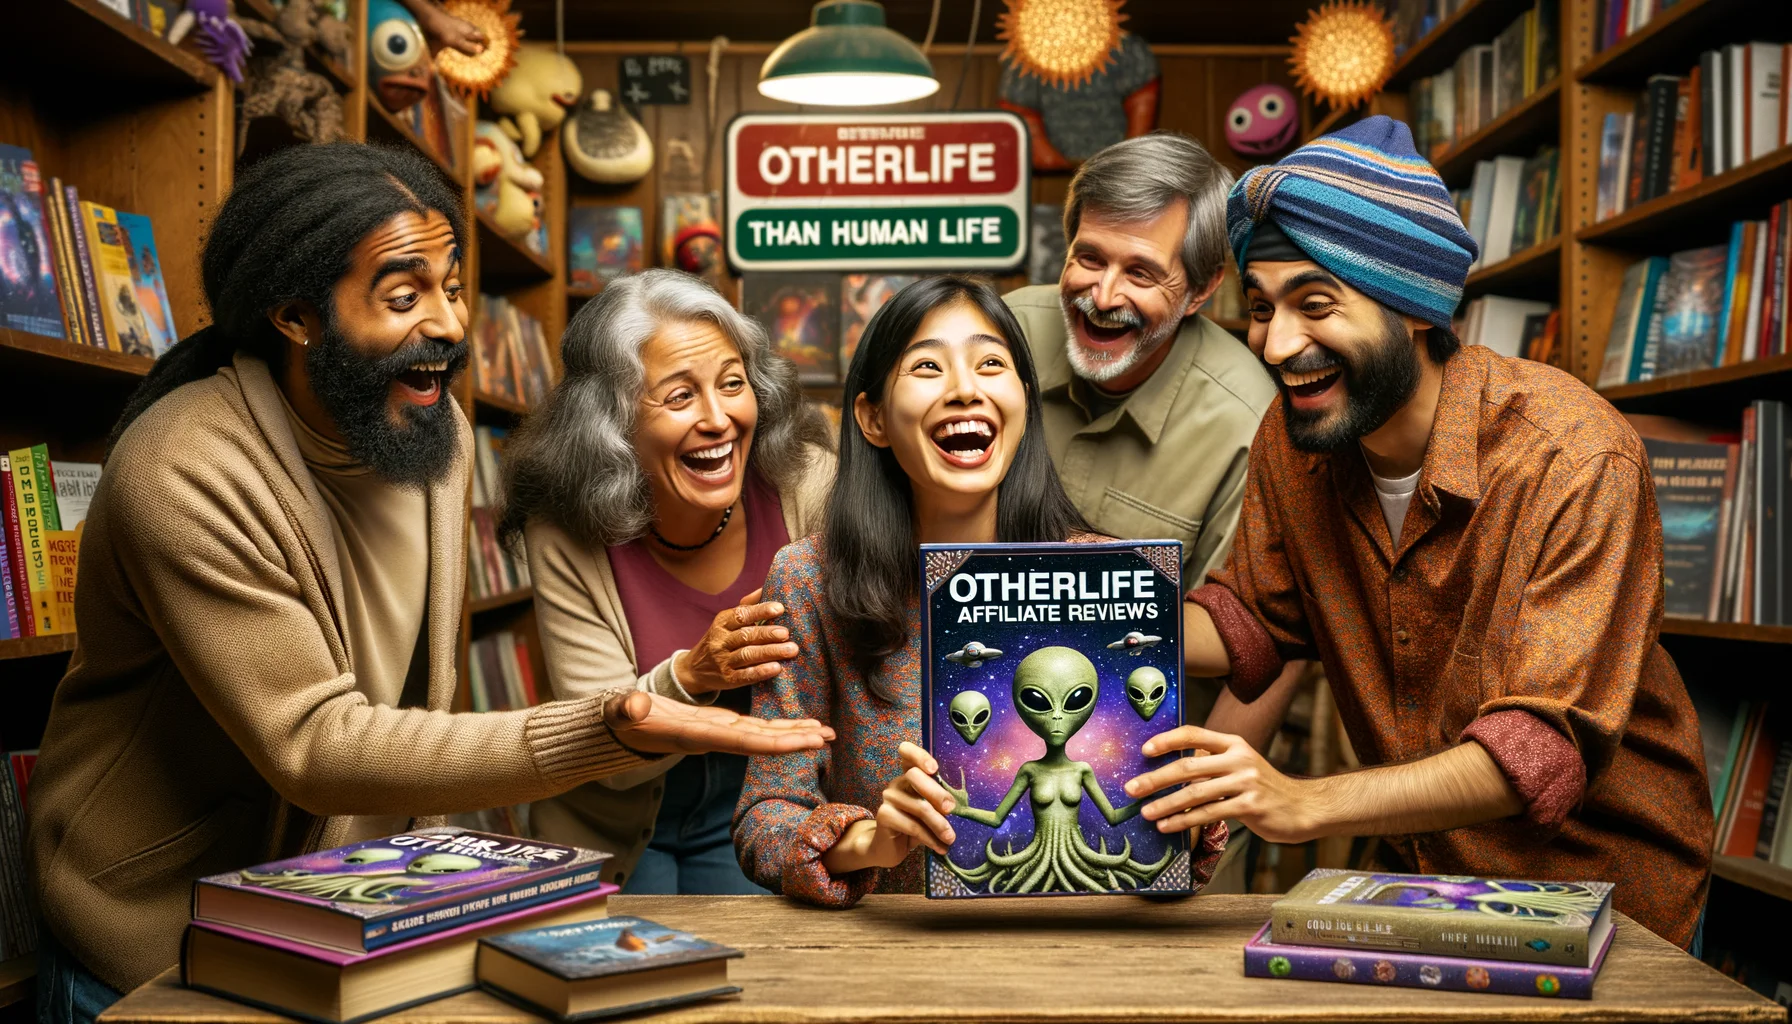 Create a humorous, captivating scene taking place in a quirky, offbeat bookstore. A cheerful South Asian woman enthusiastically shares a book titled 'Otherlife Affiliate Reviews' with a group of customers. The book cover shows alien creatures, suggesting that 'Otherlife' is a term for extraterrestrial life. The customers, consisting of a Hispanic man chuckling at the book, a Caucasian woman grinning widely, and a Middle-Eastern man laughing heartily, add to the overall humor of the scenario. The store has funny signs like 'more interesting than human life'.